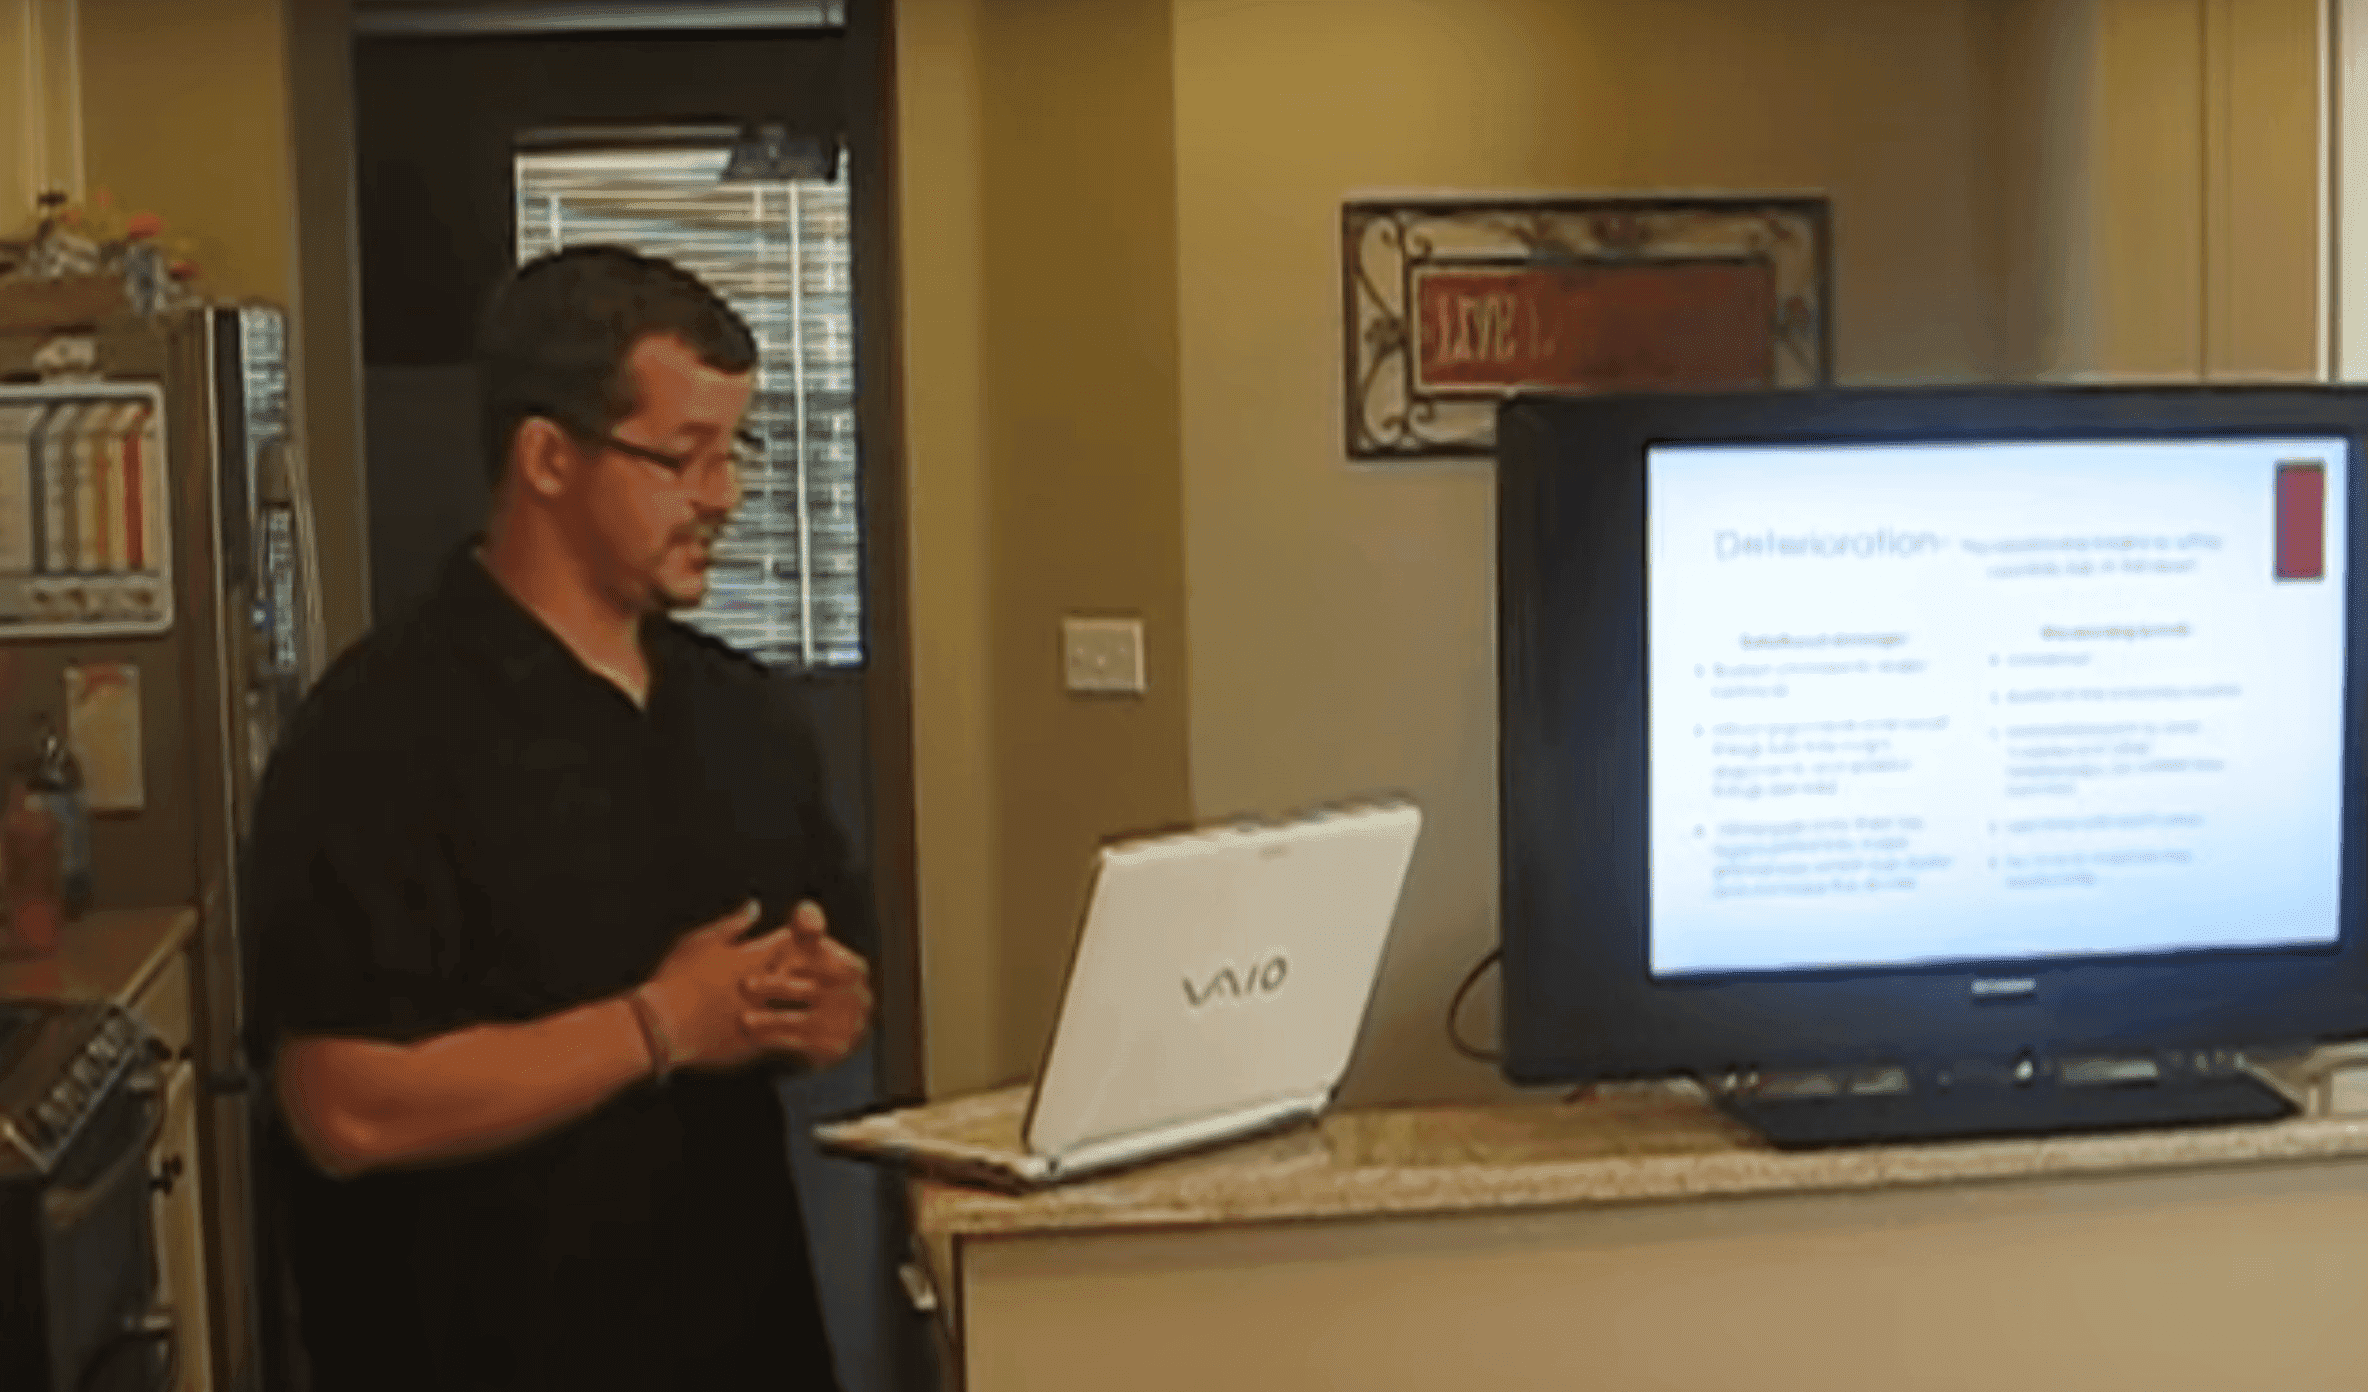 Chris Watts giving a presentation on "Communication Speech, Relationship Deterioriation and Repair | Photo: YouTube/Christopher Watts